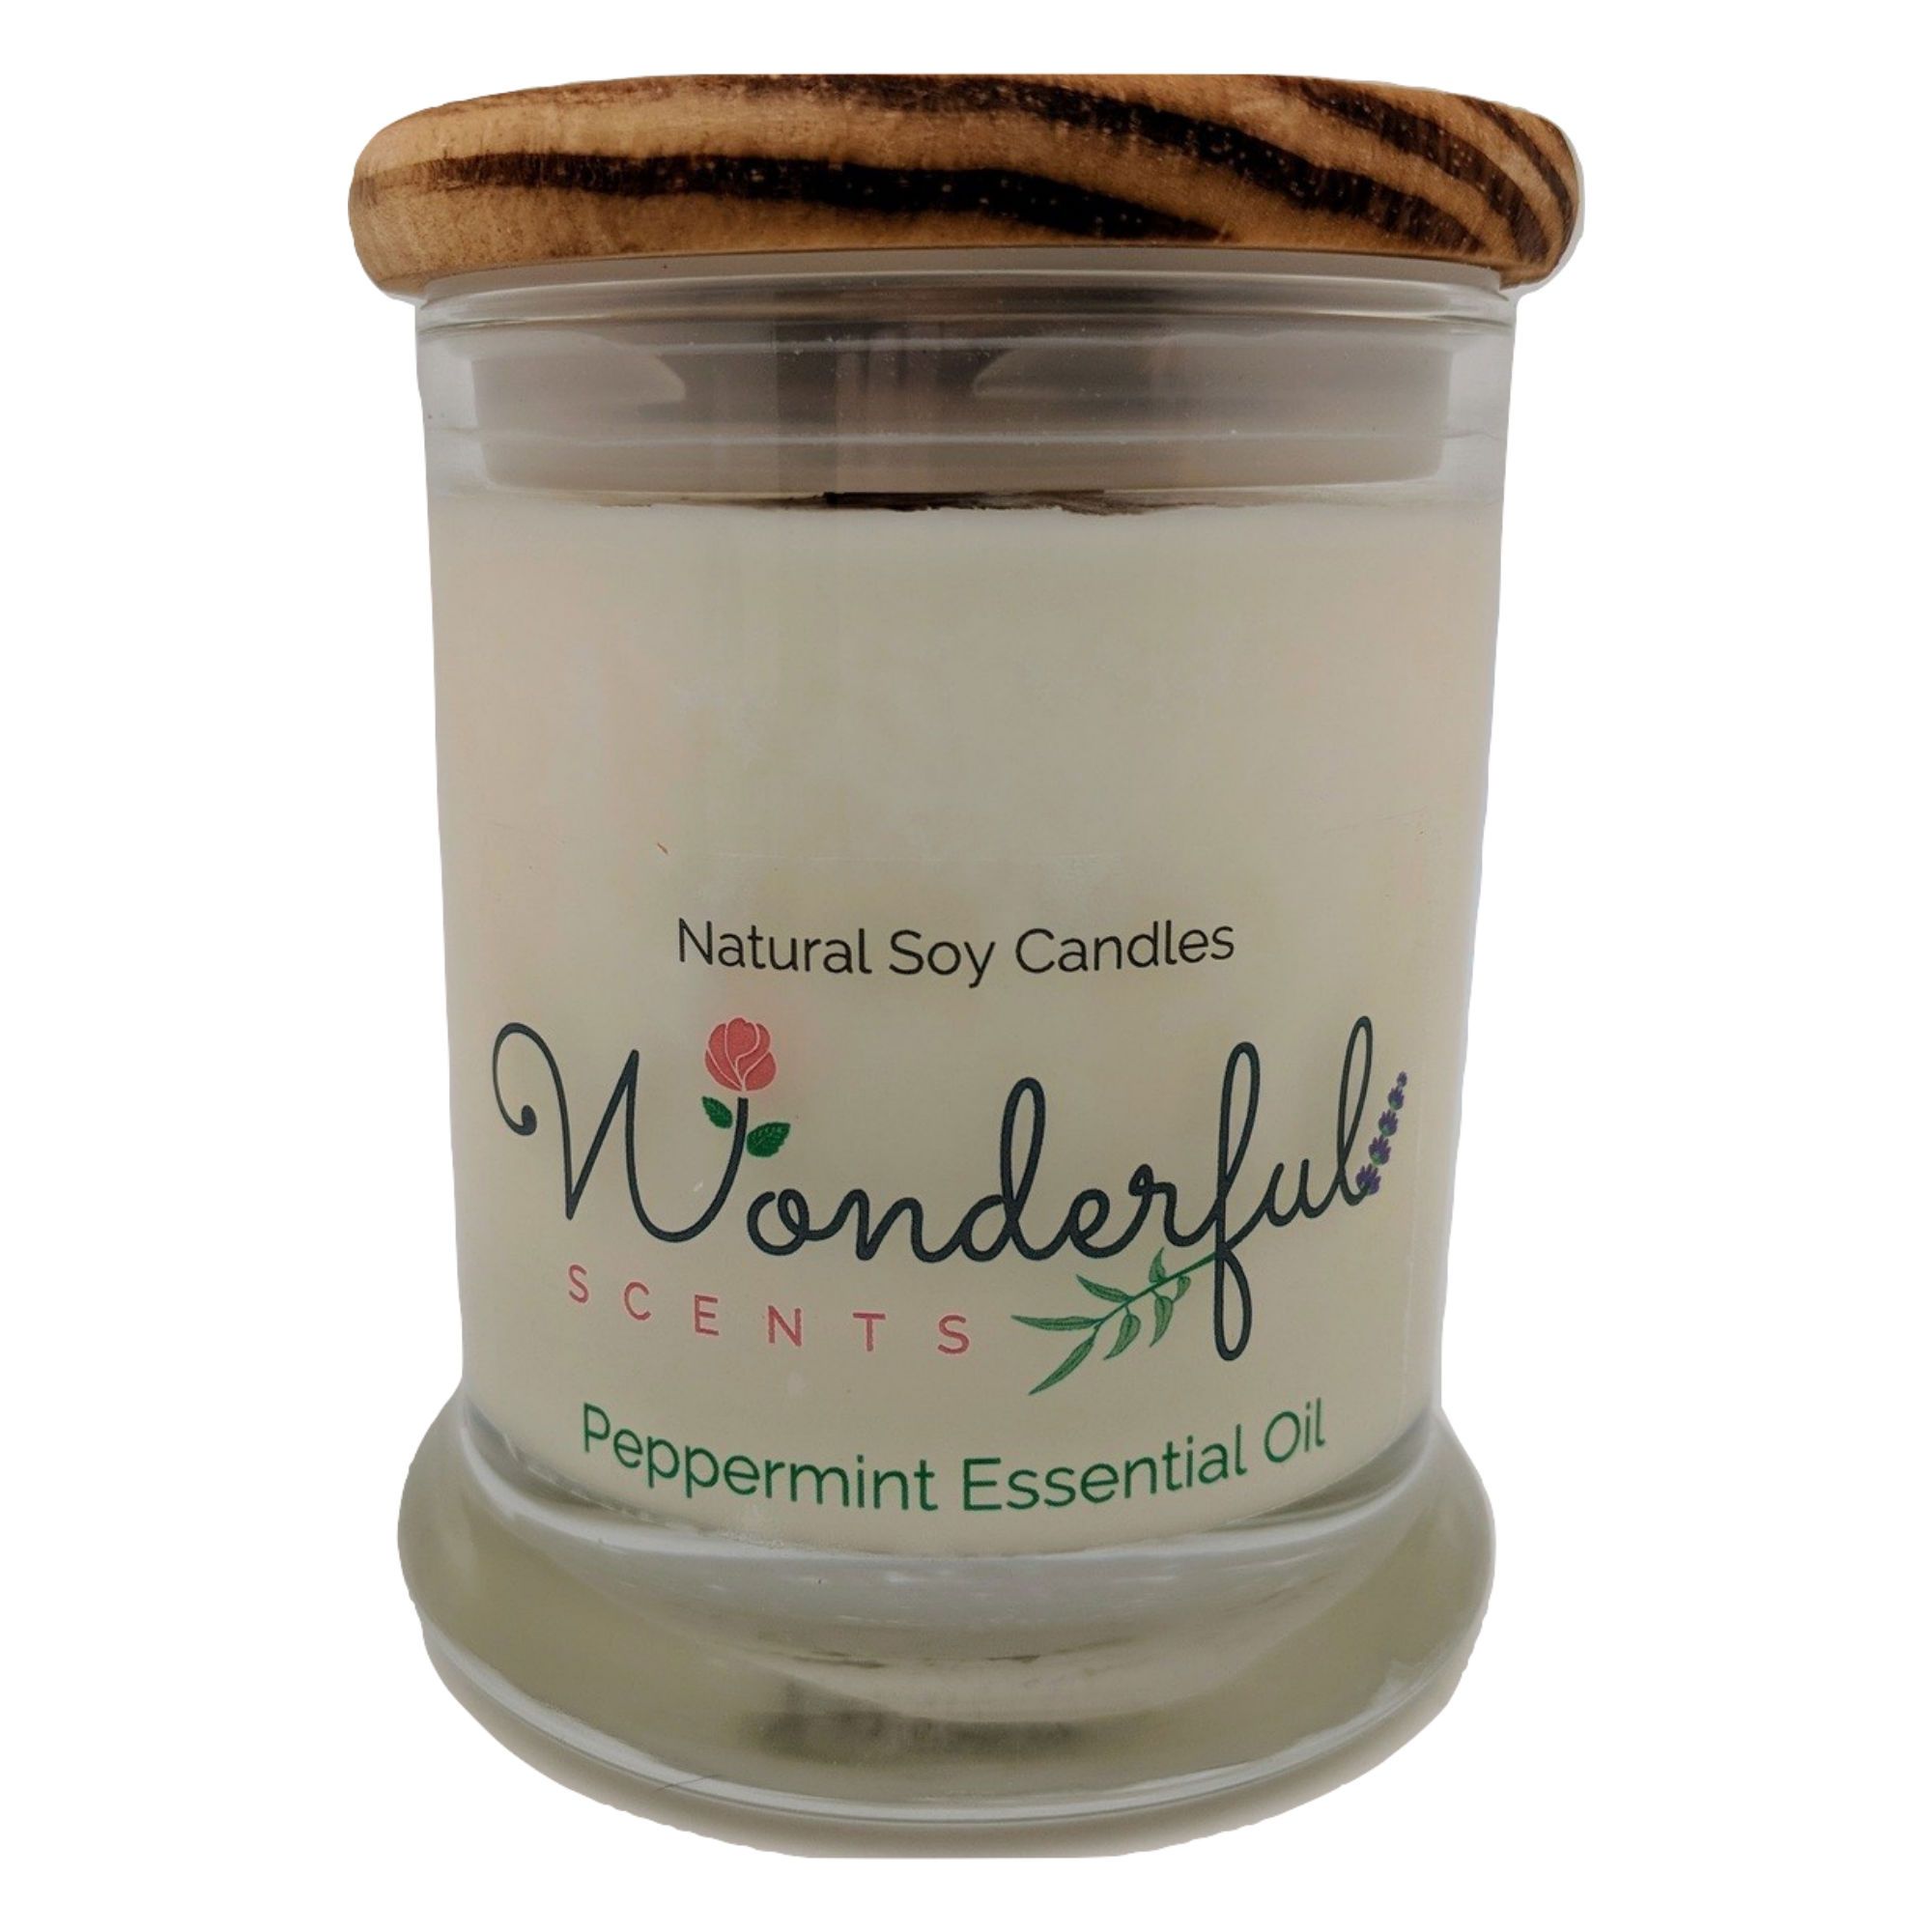 Wonderful Scents 12 oz Wood Wick Scented Candle Peppermint Essential Oil